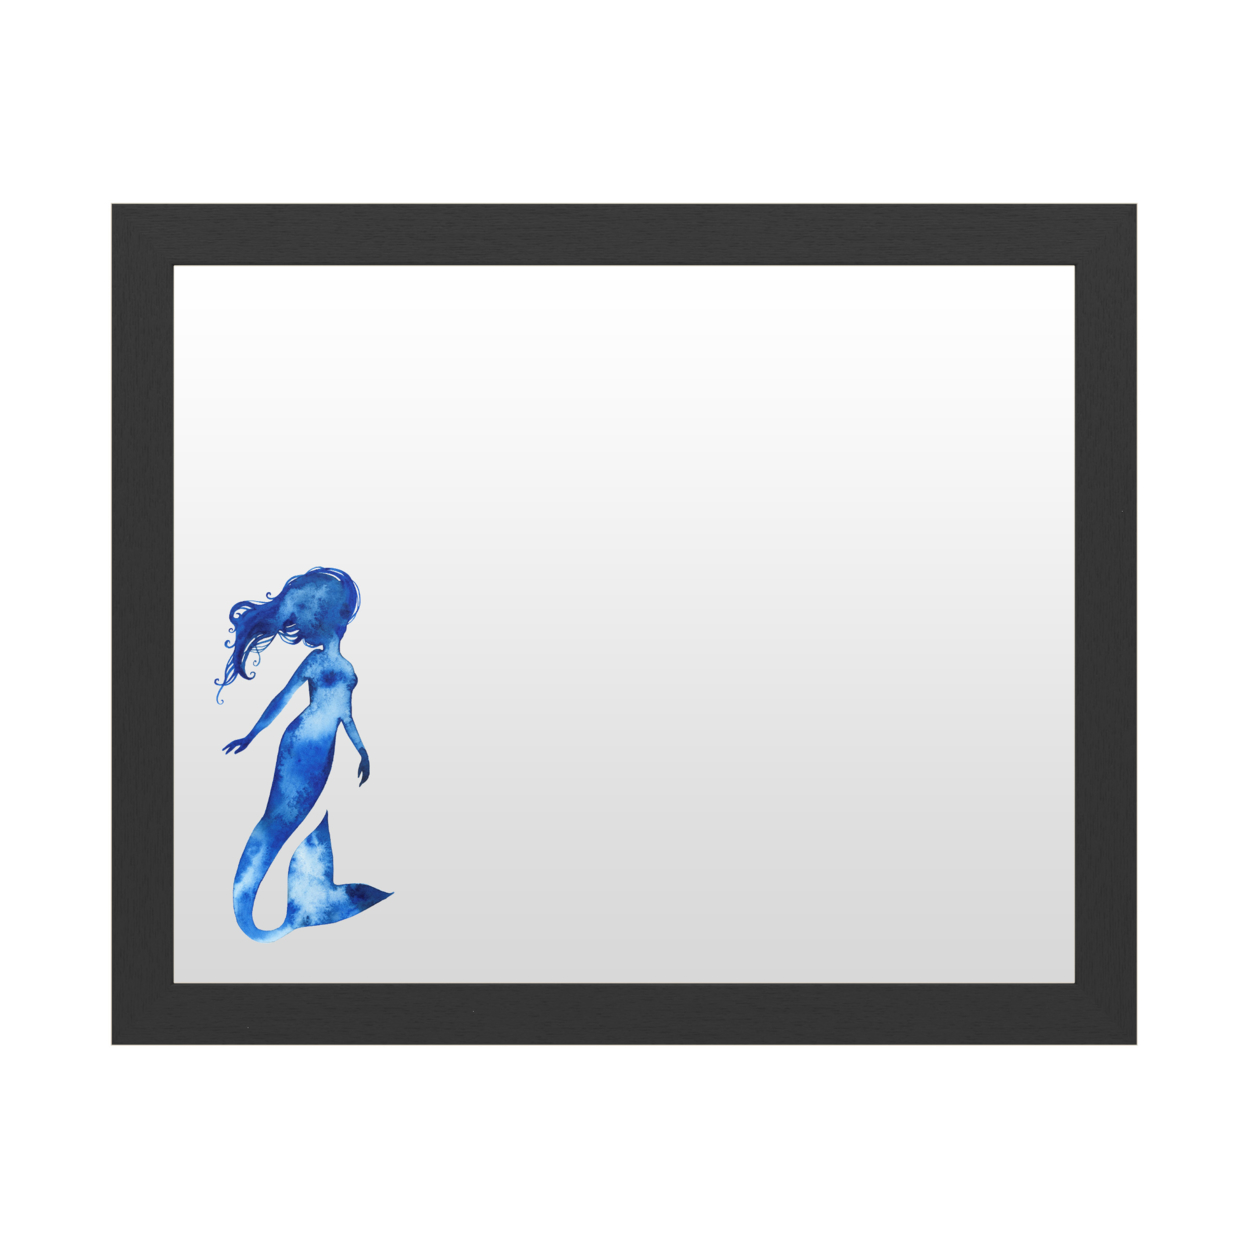 Dry Erase 16 X 20 Marker Board With Printed Artwork - Grace Popp Blue Sirena Ii White Board - Ready To Hang